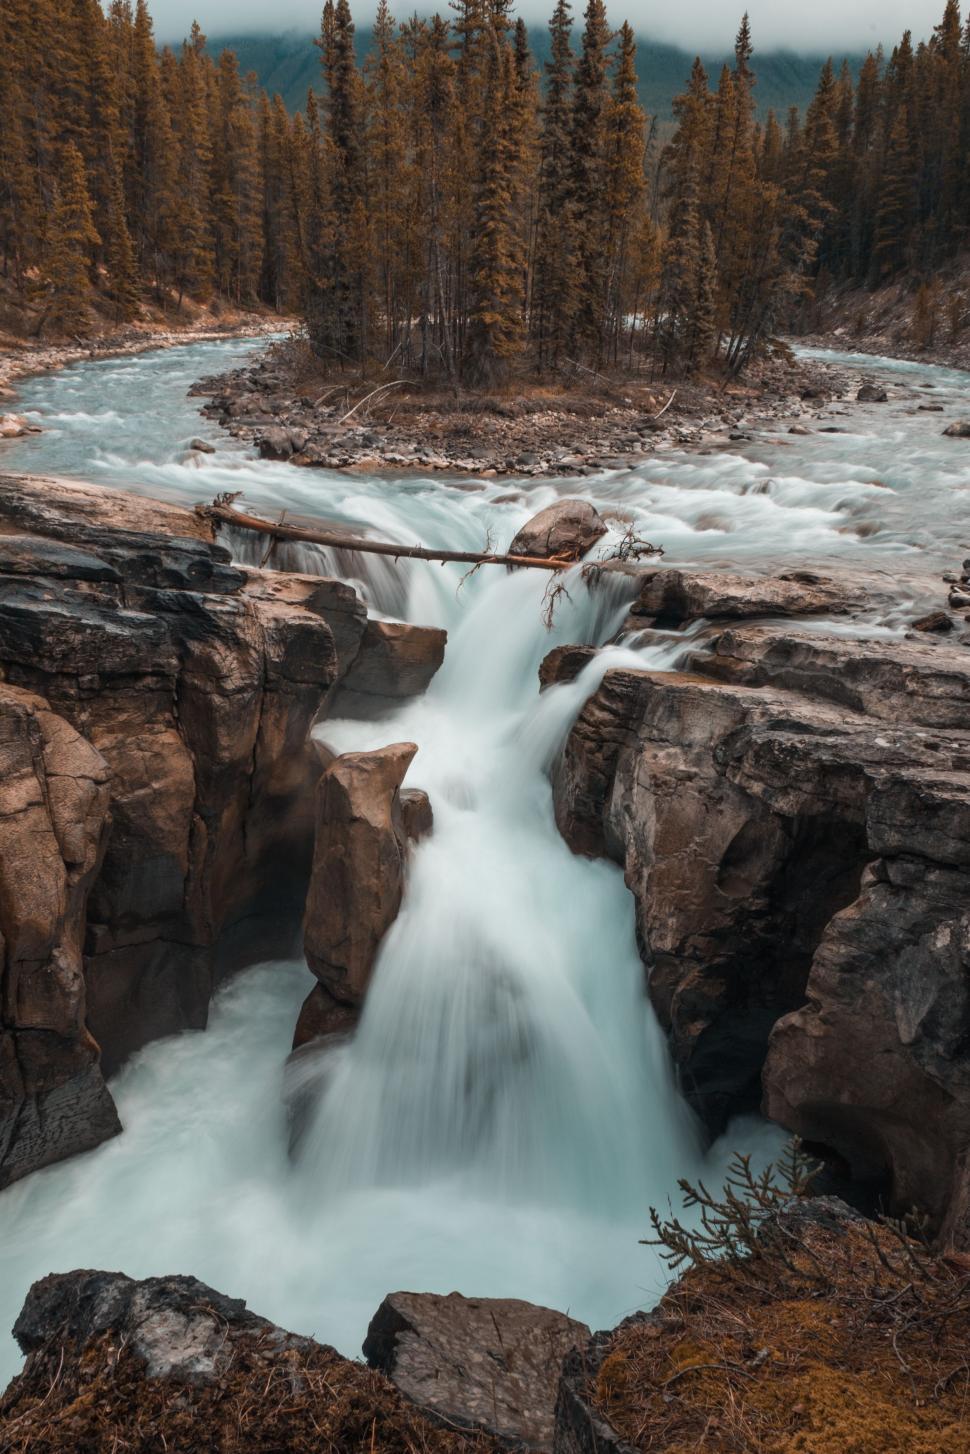 Free Image of Majestic Waterfall Flowing Through Forested River 